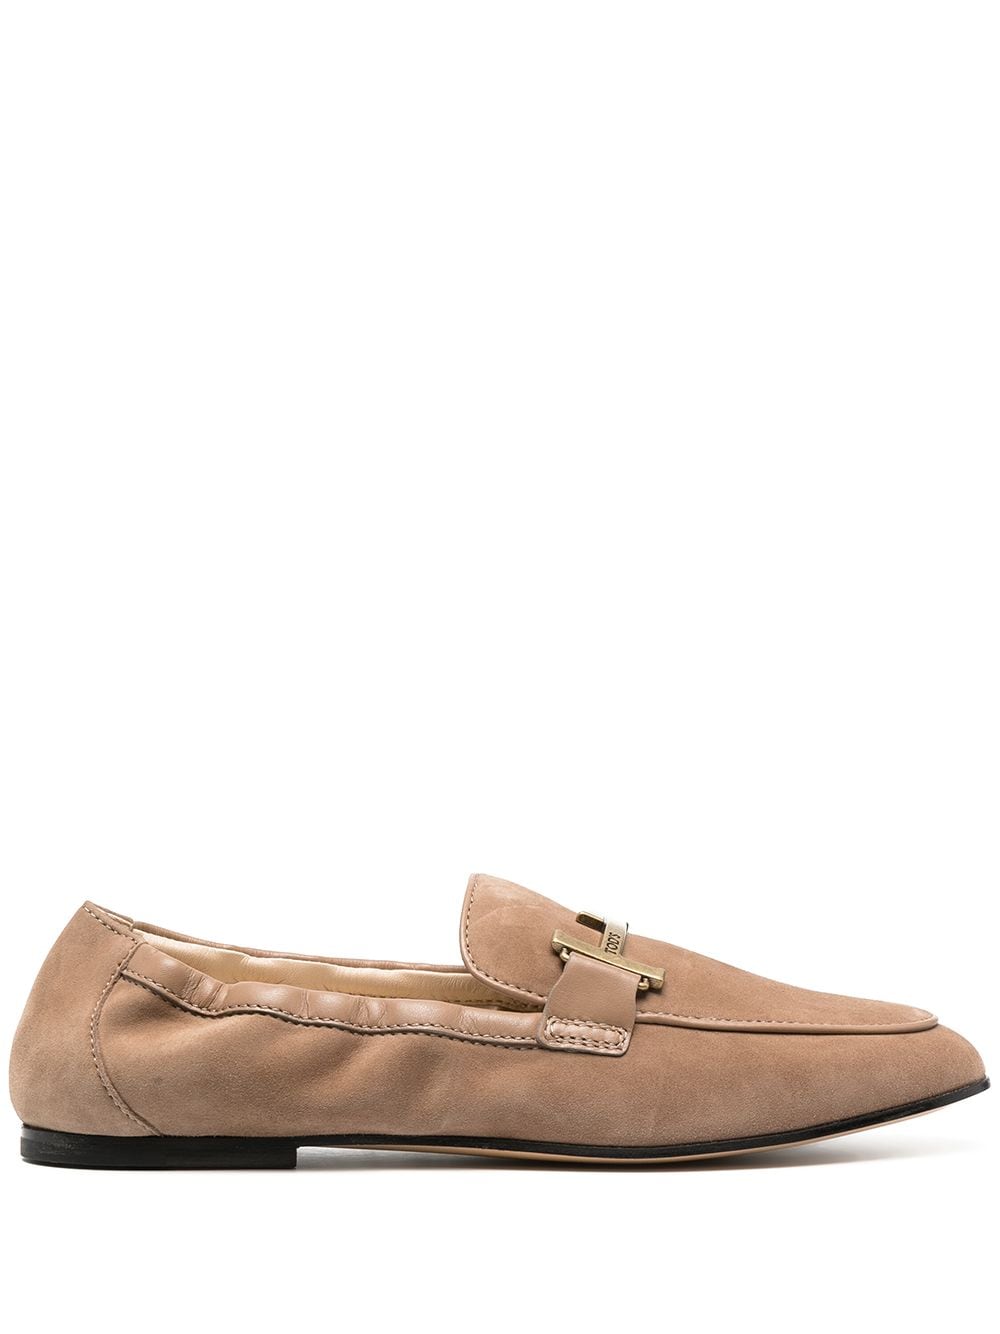 TOD'S T-LOGO SLIP-ON LOAFERS